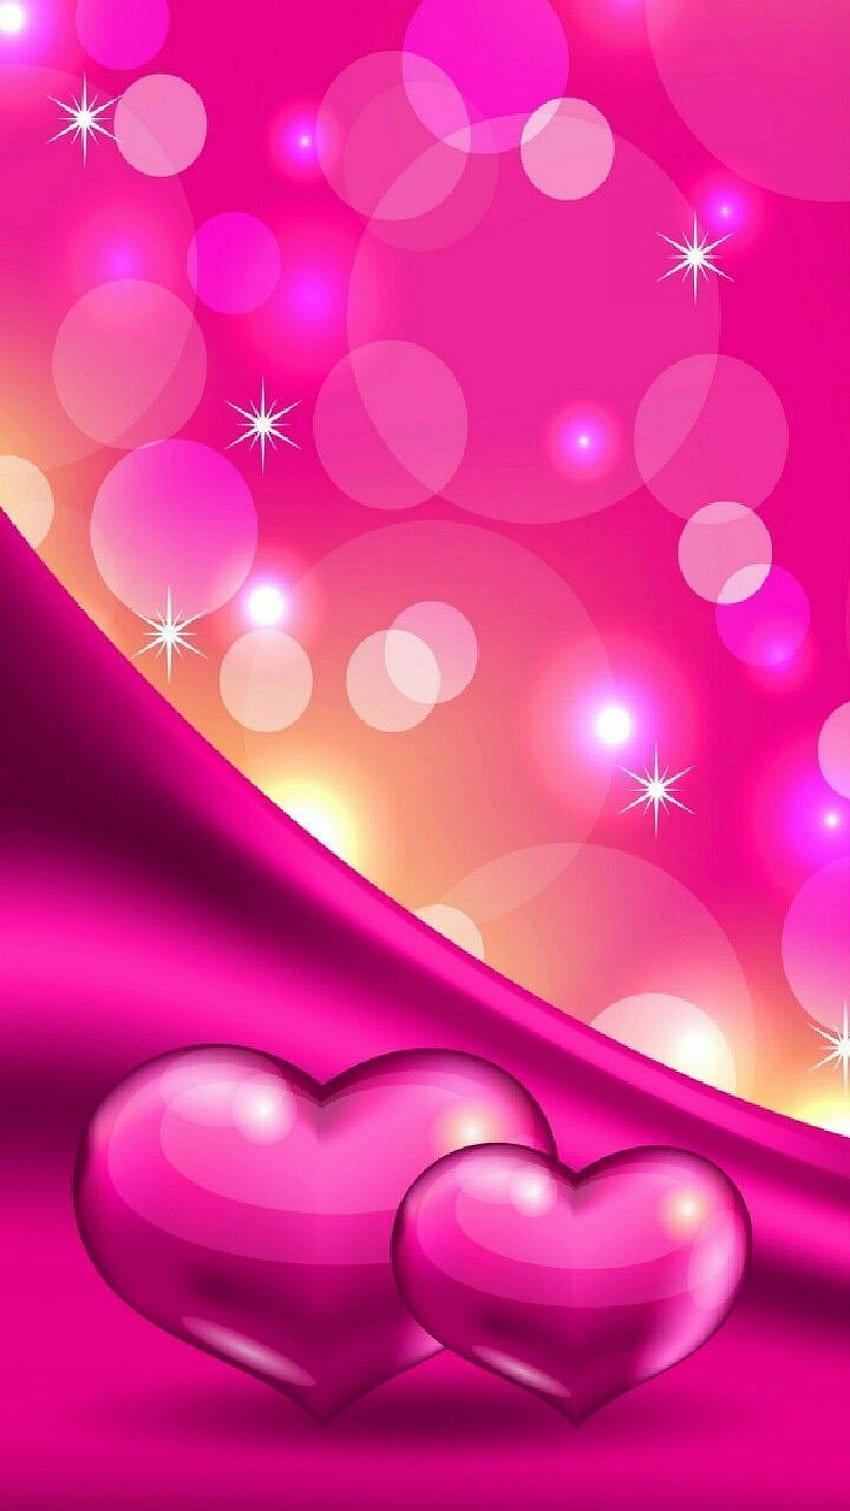 Pink Heart - Android, iPhone, Background / (, ) () (2020), Pink ...